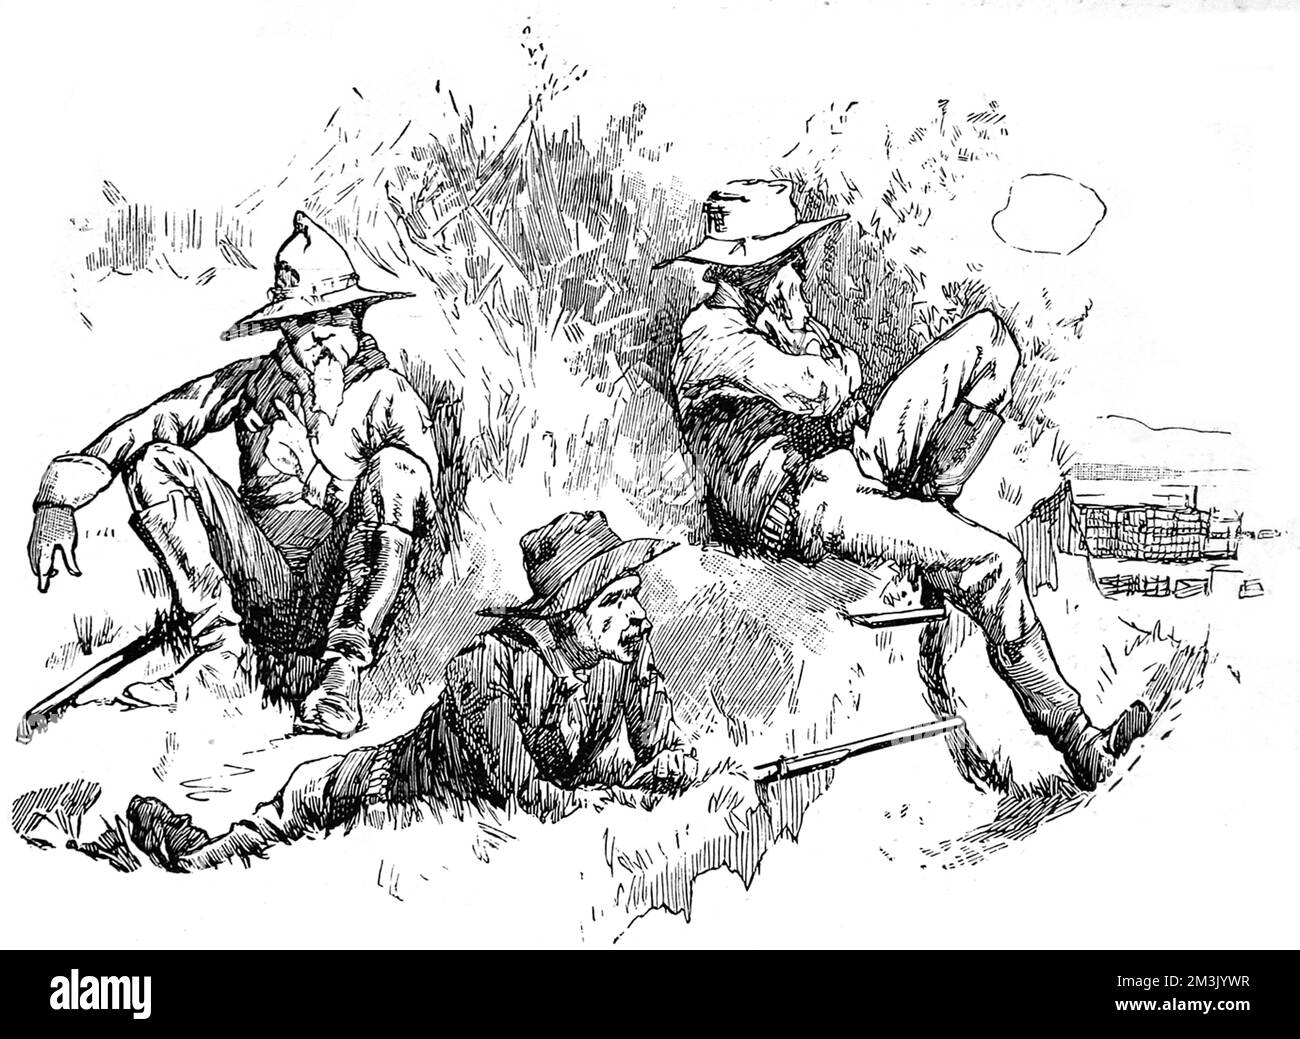 Illustration of several cowboys protecting their ranch from Apache native American Indians.     This image was made at the time of the last war between the Apache native American Indians and the United States Army in Southern Arizona and Northern Sonora, Old Mexico, c.1887.     Date: 1887 Stock Photo